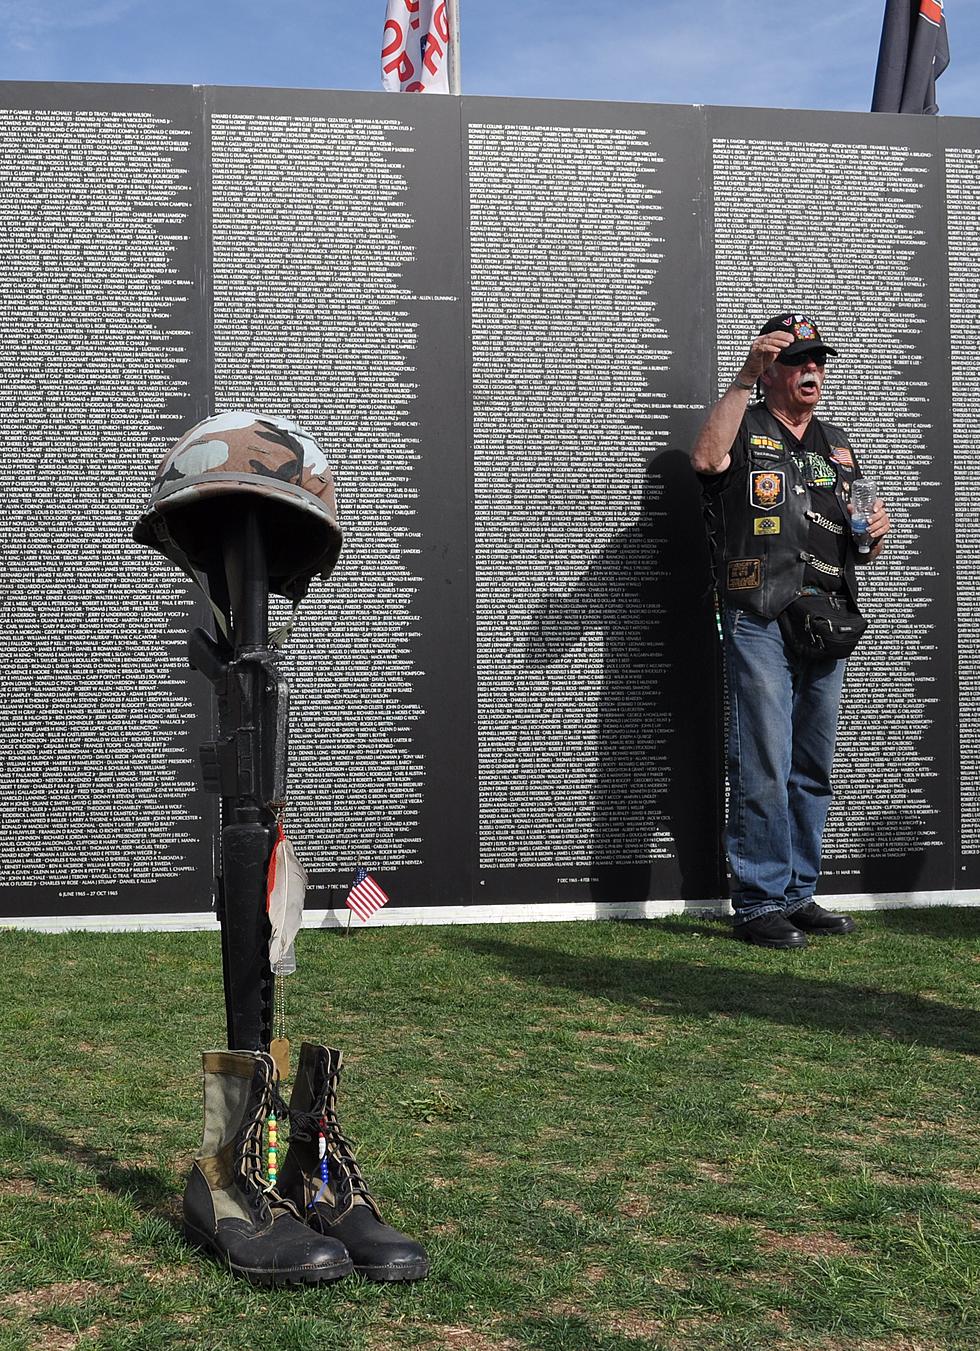 The AVTT Traveling Vietnam Wall is in Dacono This Week